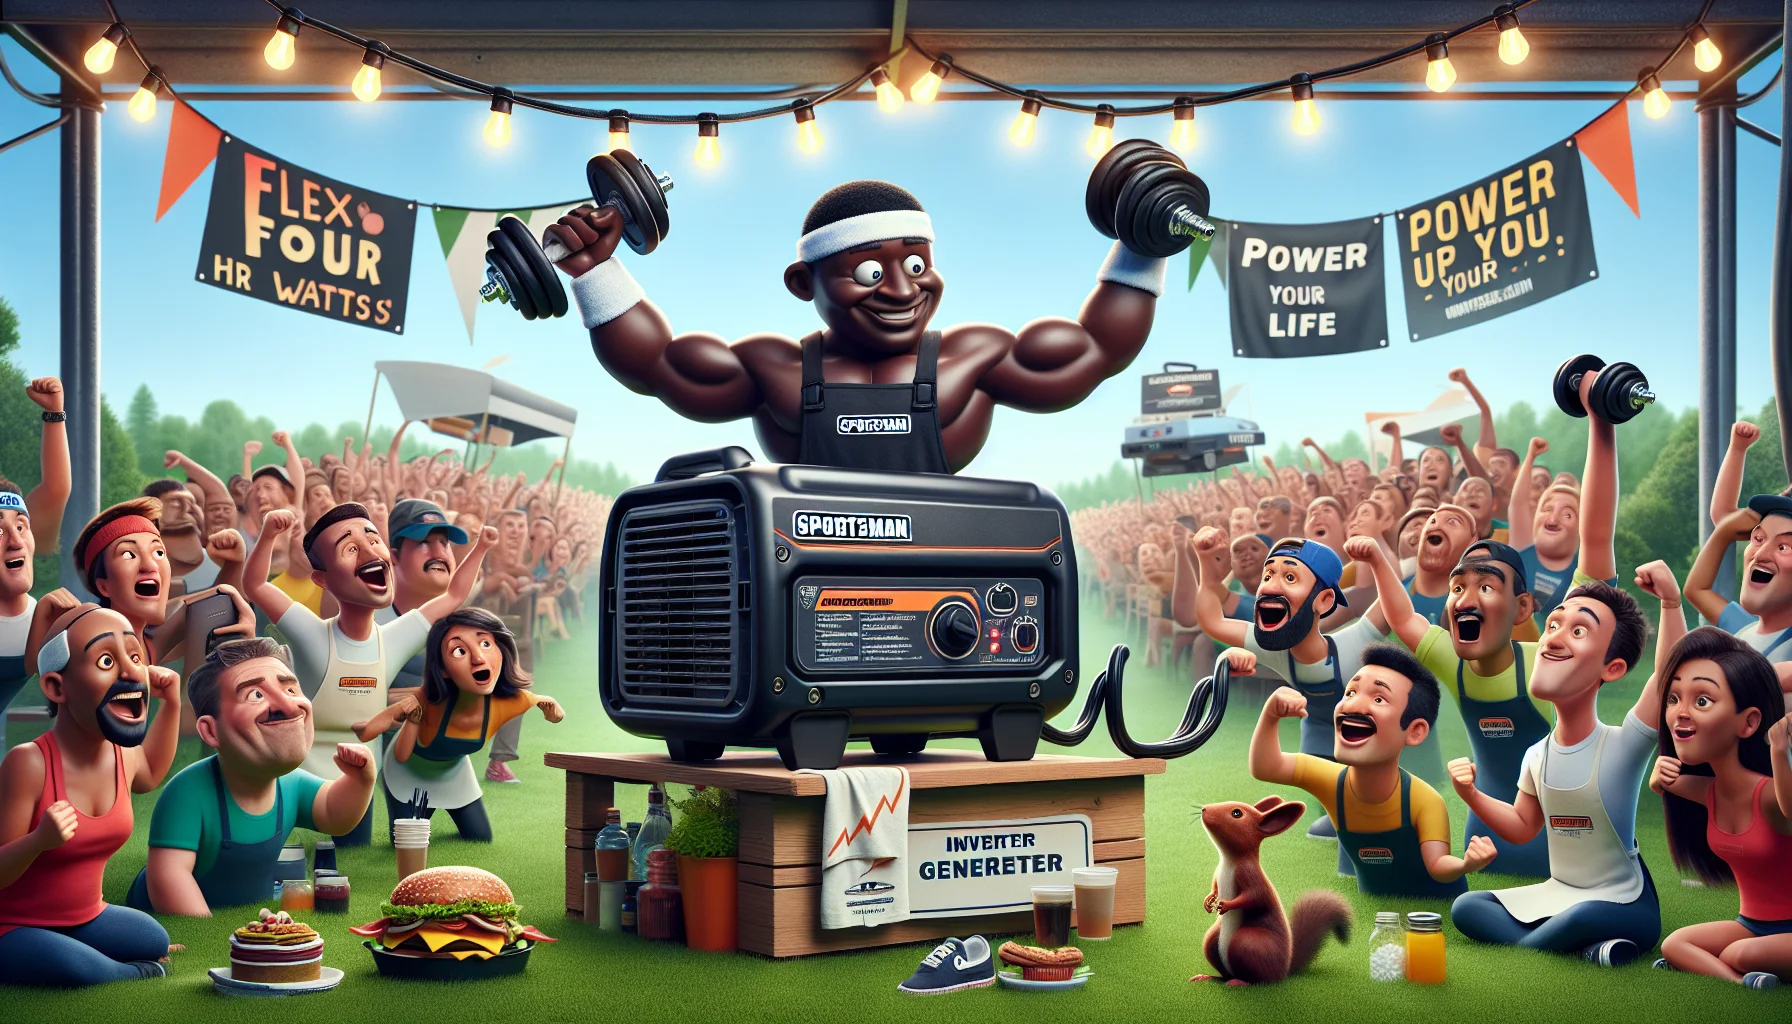 An amusing, surreal scenario unfolds. A sportsman inverter generator is personified, donned in an athletic headband and lifting dumbbells, as a display of its 'power'. It is located in a lush, green park surrounded by diverse cheering onlookers. A black male food truck operator and a Hispanic female barista, both wearing aprons, give the inverter generator an enthusiastic thumbs-up in approval. Their stands, glowing with lights, indicate the electricity generated by this sportsman inverter generator. Banners overhead display punny slogans like 'Flex Your Watts' and 'Power Up Your Life', adding a playful element. Animals like squirrels and birds appear intrigued.